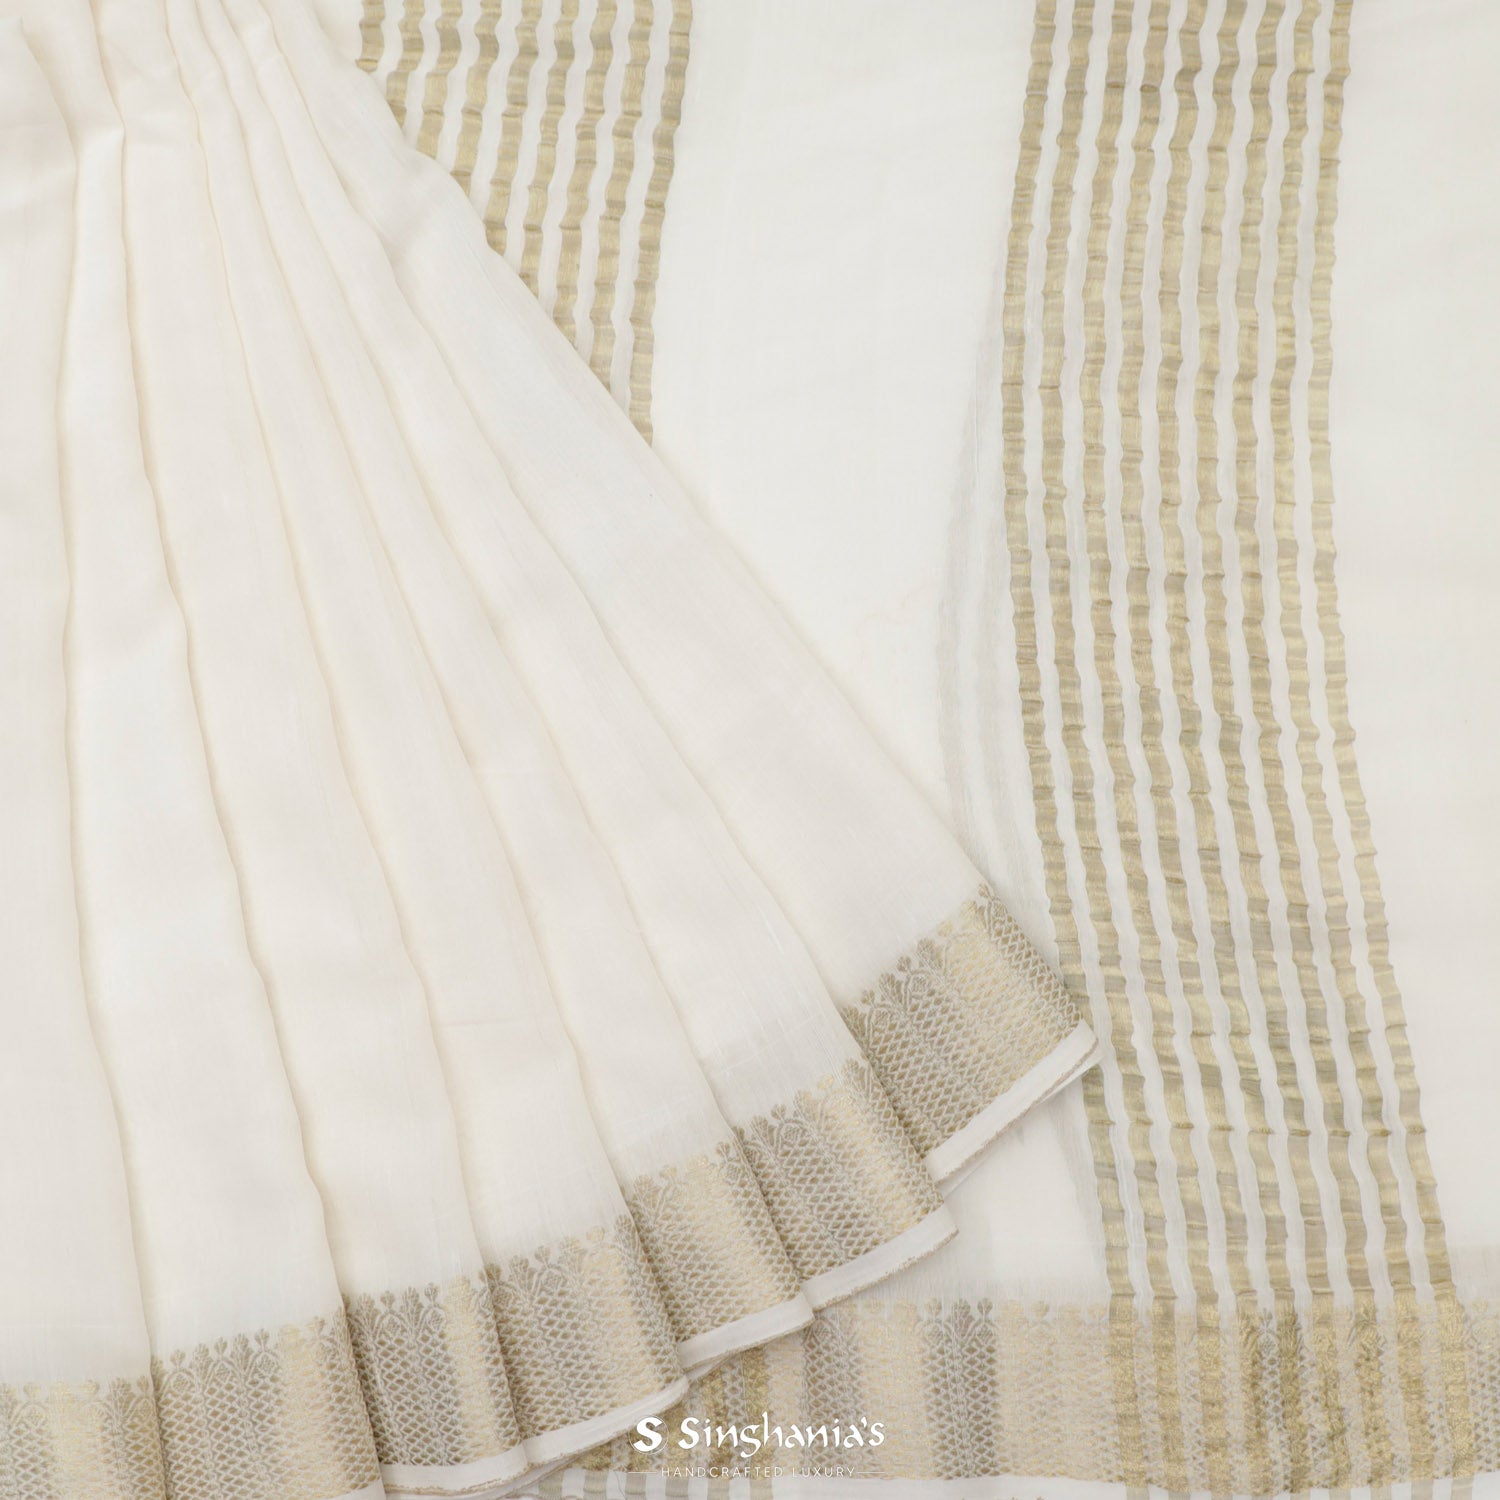 Floral White Matka Saree With Contrast Border